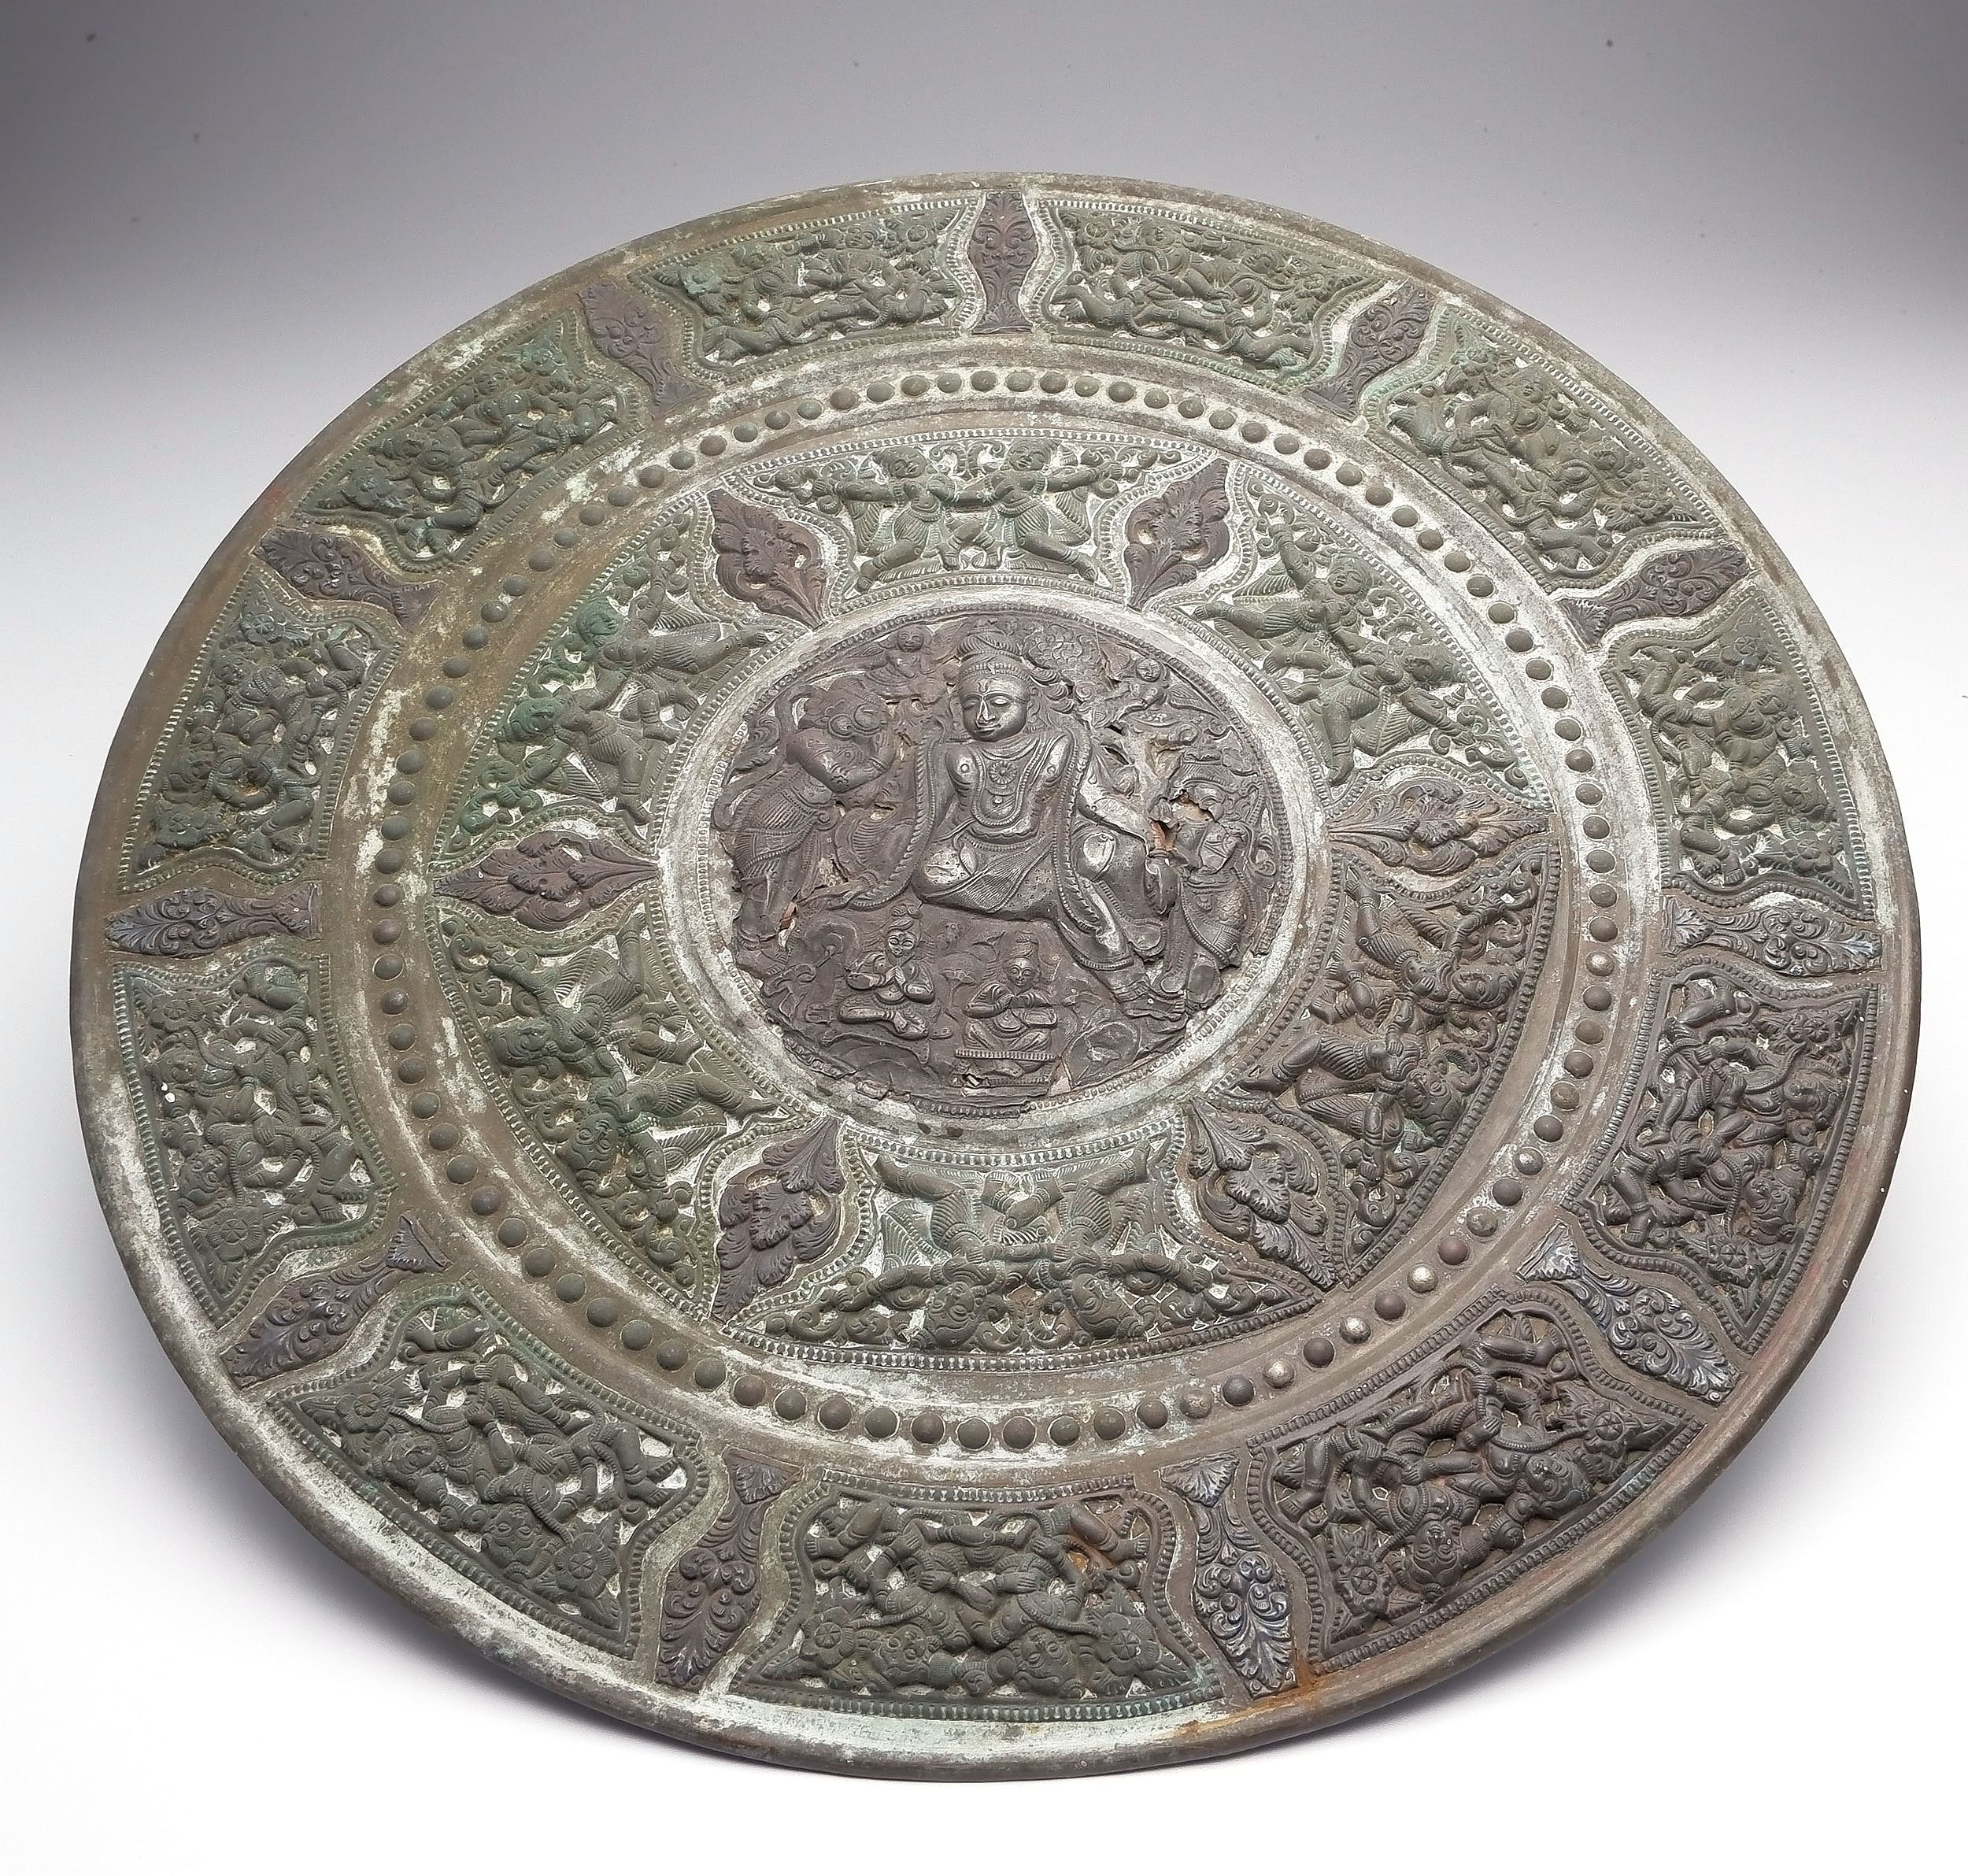 'Large Indian Mixed Metal Tray Repousse Decorated with HInduist Iconograhy, 19th Century'